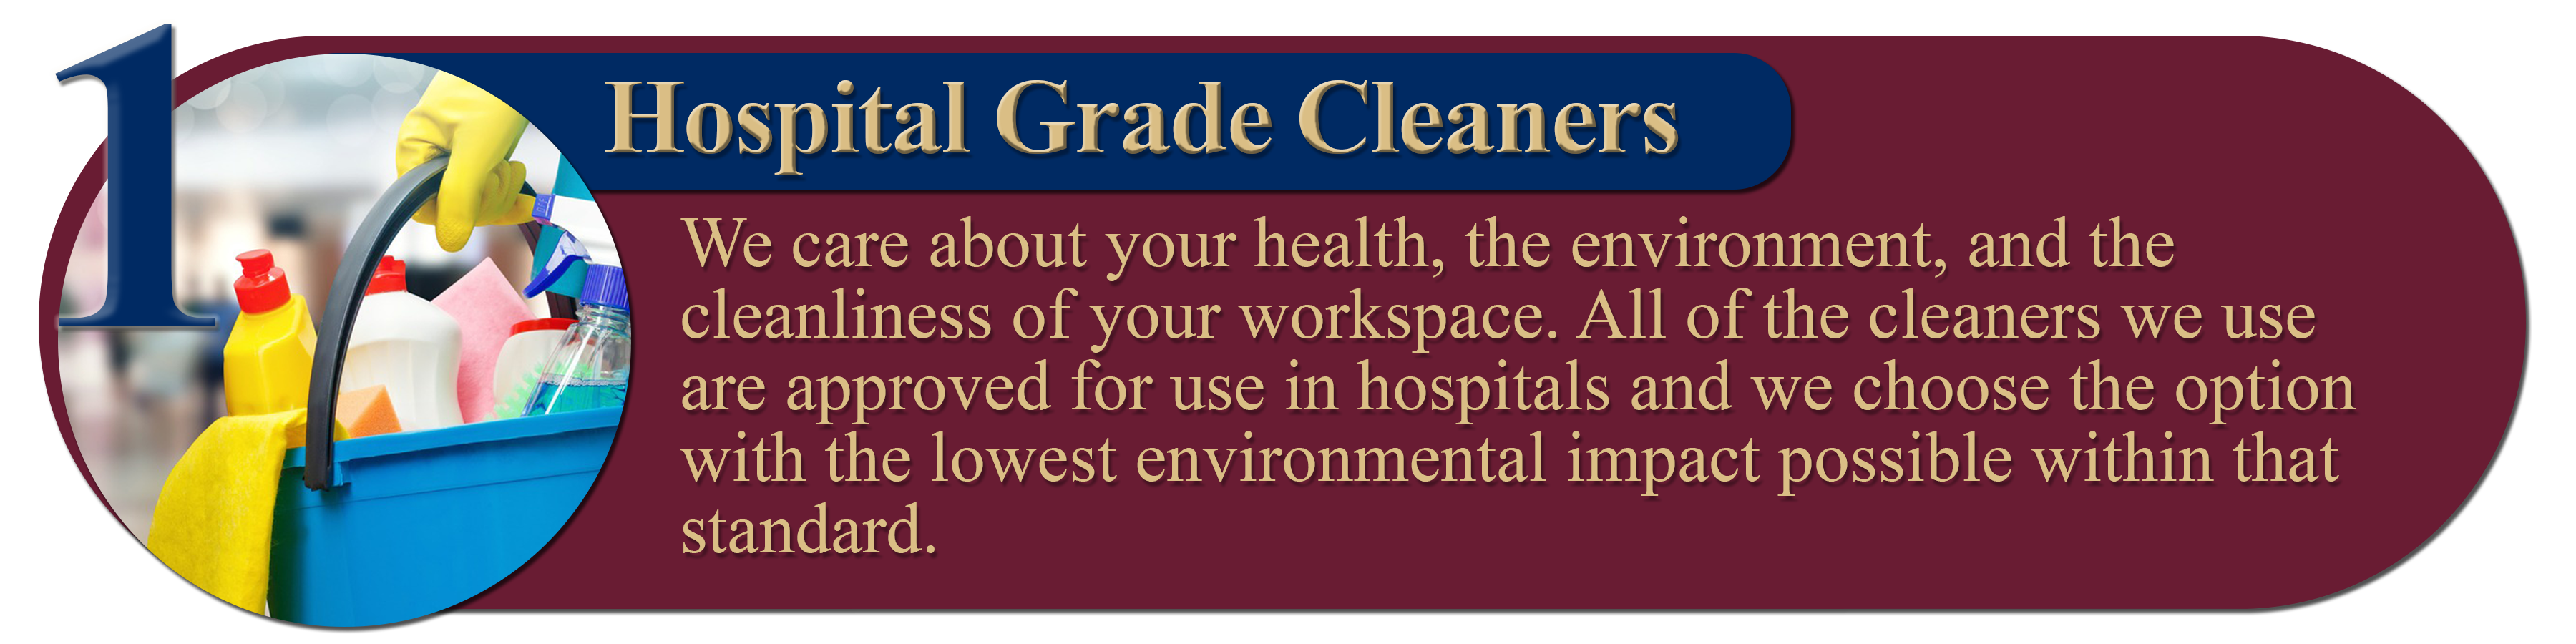 1. Hospital Grade Cleaners: We care about your health, the environment, and the cleanliness of your workspace. All of the cleaners we use are approved for use in hospitals and we choose the option with the lowest environmental impact possible within that standard.